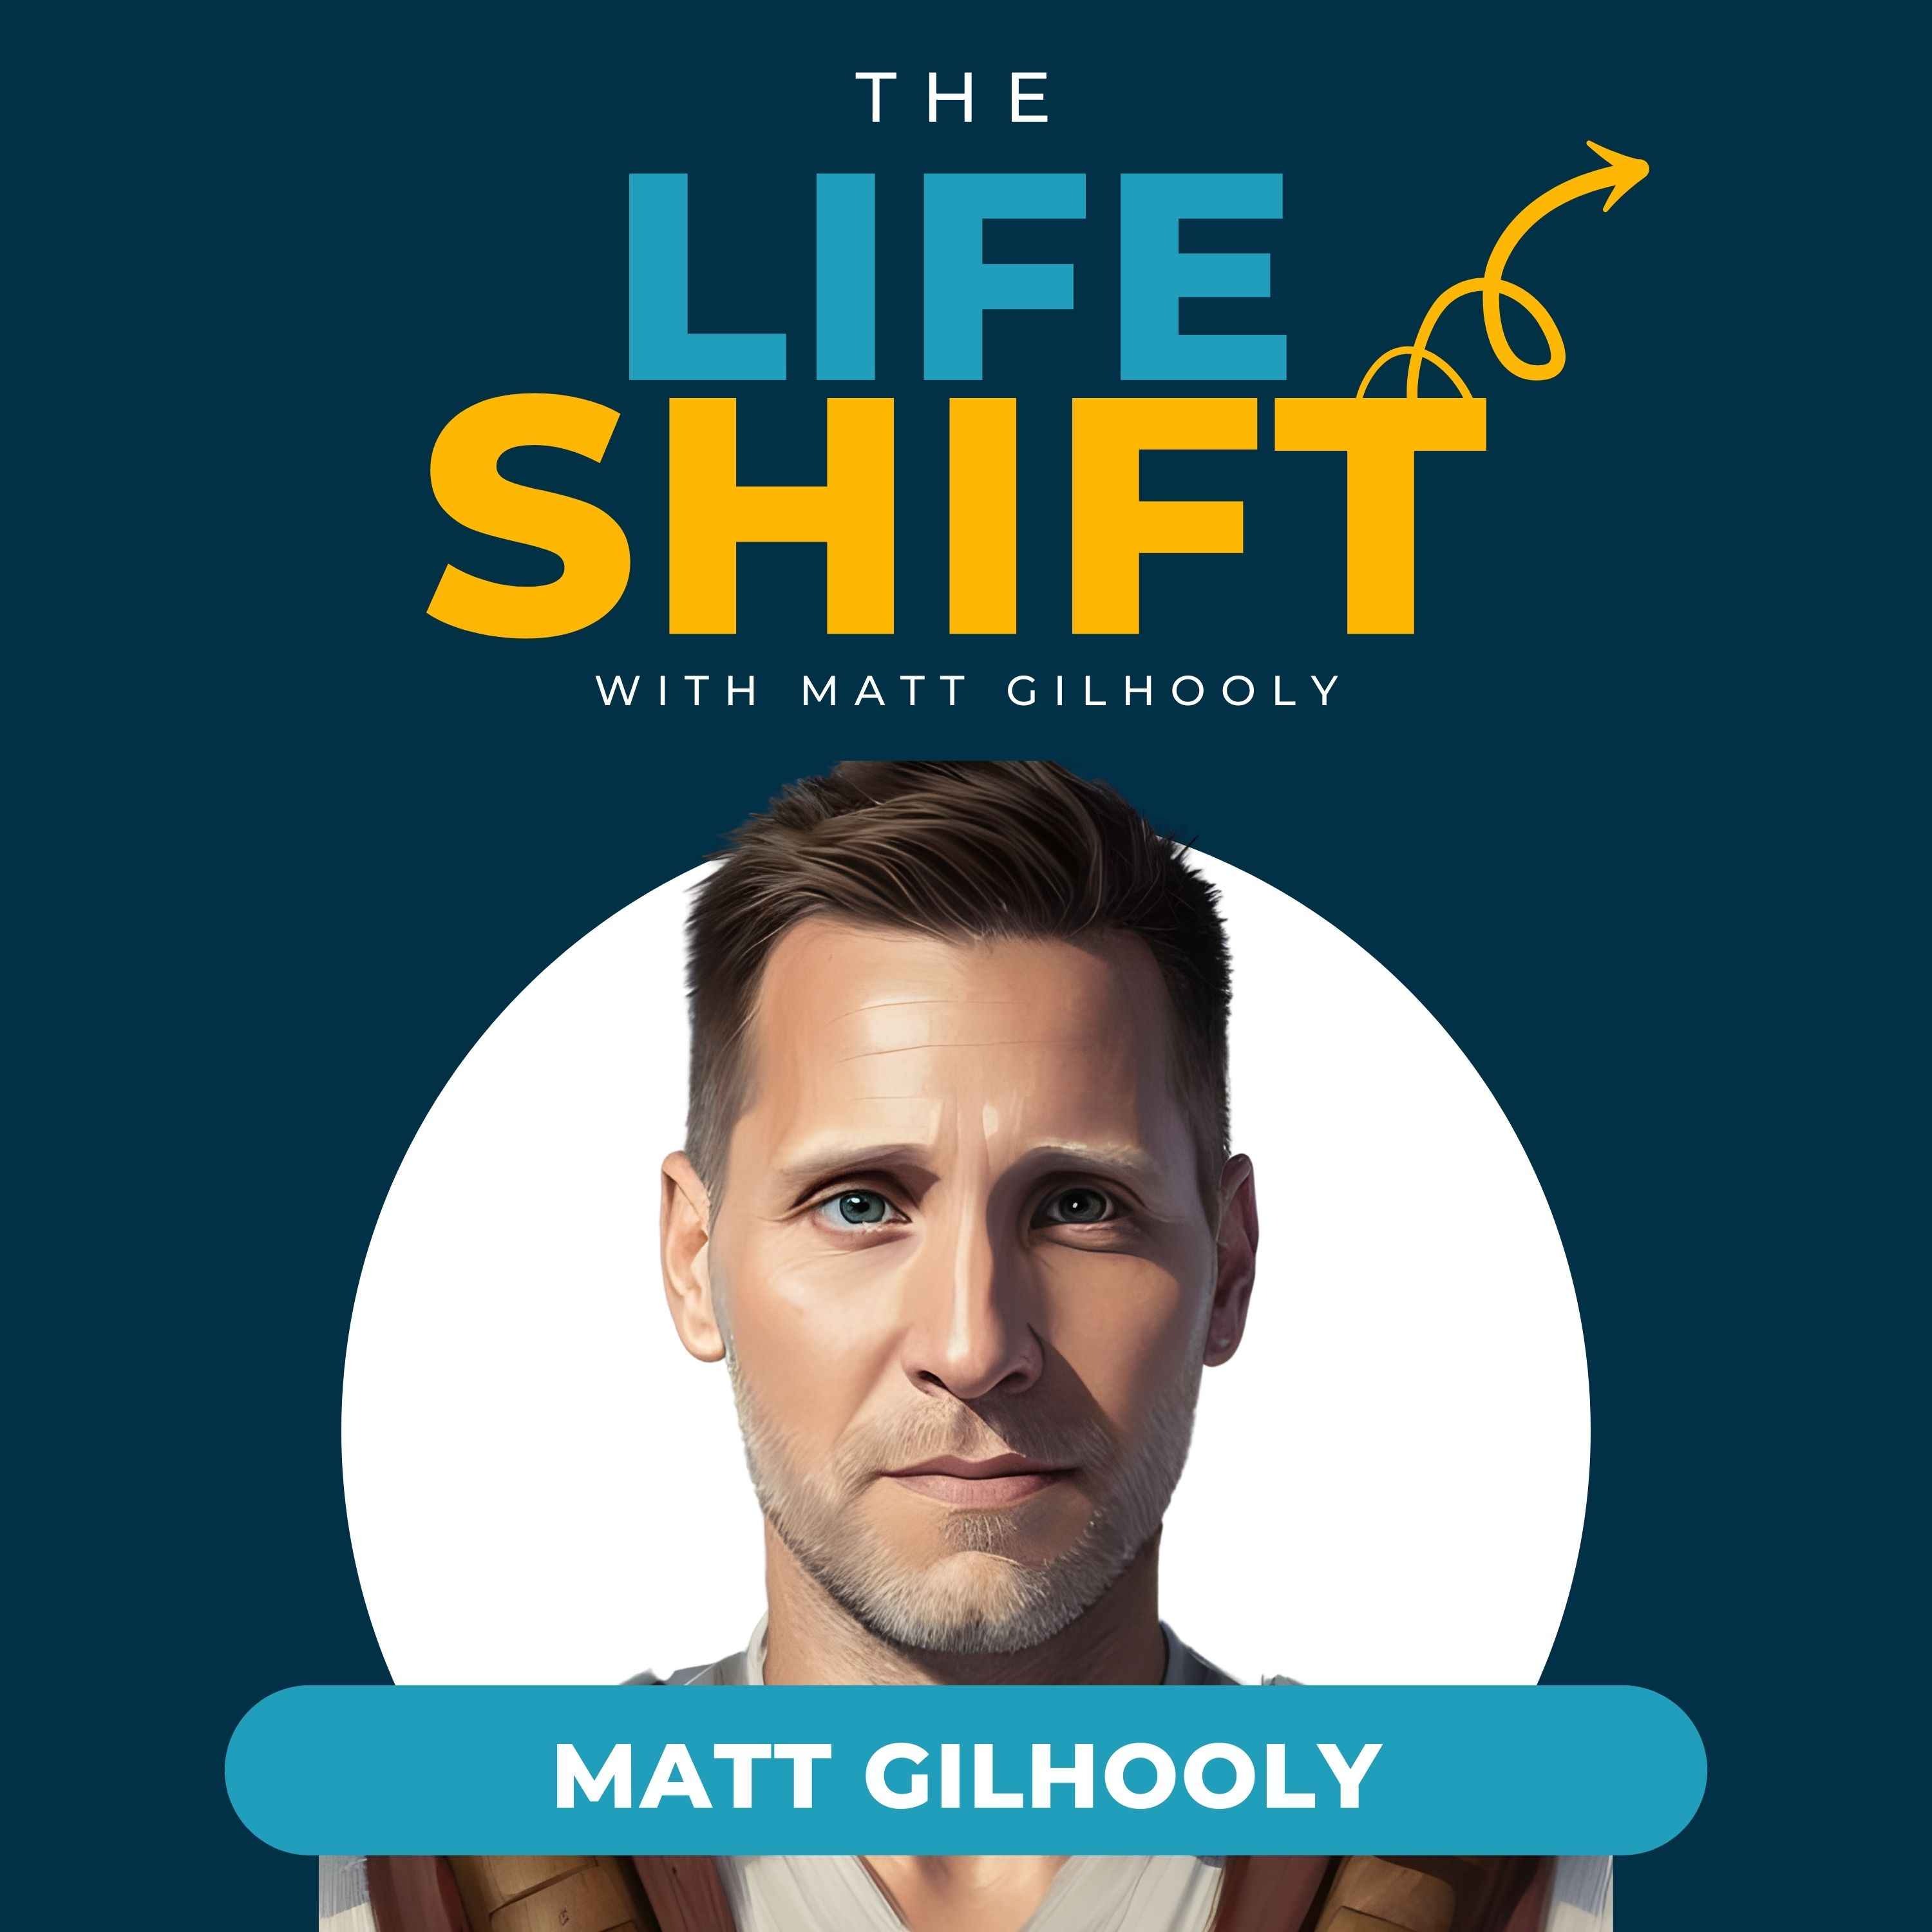 REPLAY: Honoring Memories, Overcoming Life's Challenges: A Story of Grief, Growth And Empowerment | Matt Gilhooly Image